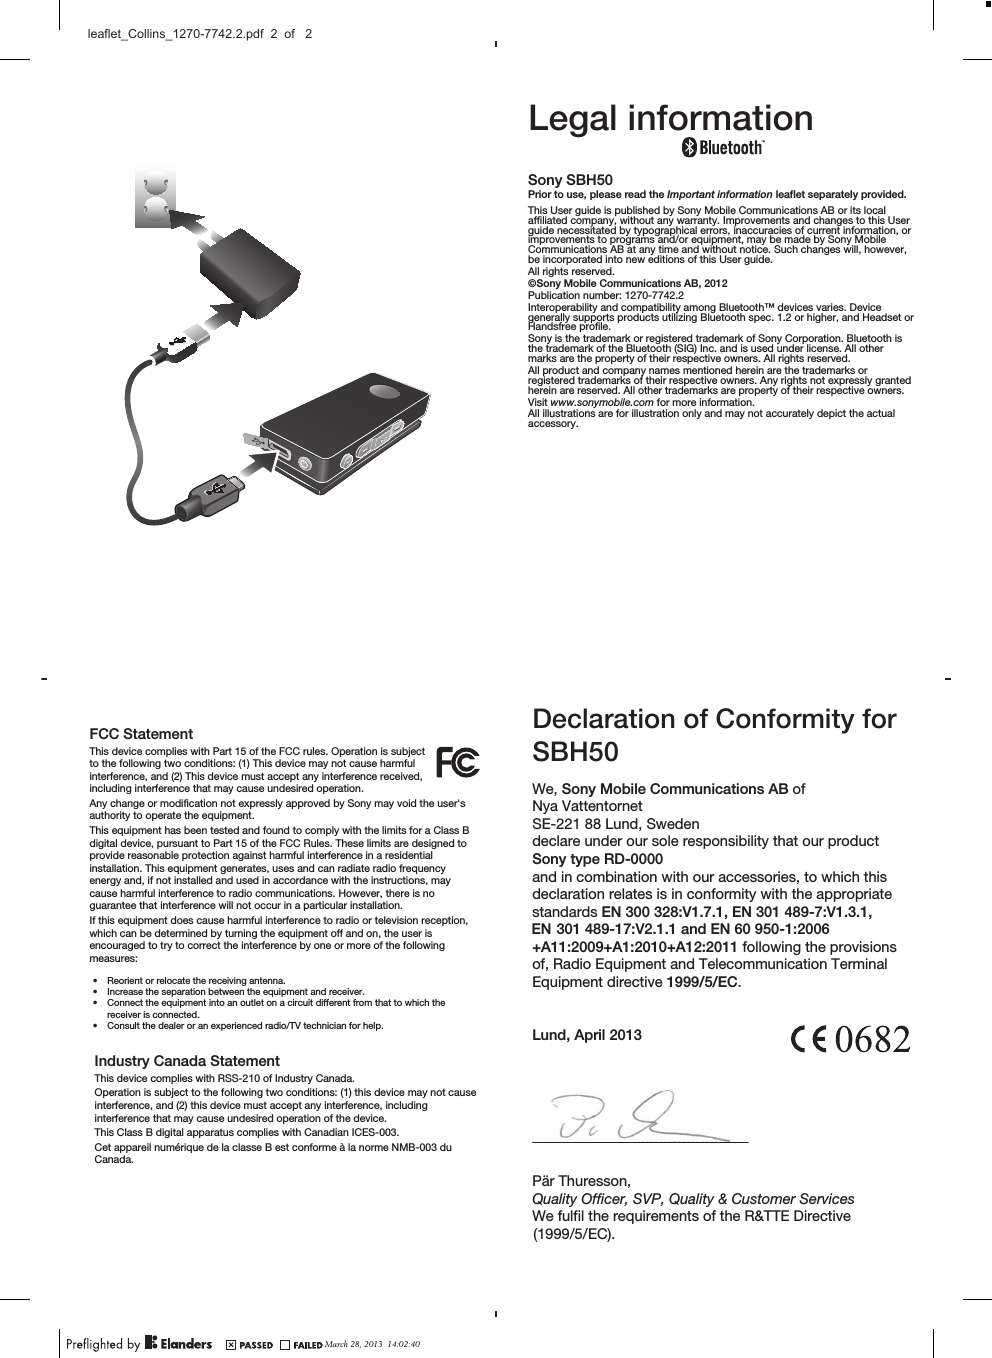 FCC StatementThis device complies with Part 15 of the FCC rules. Operation is subjectto the following two conditions: (1) This device may not cause harmfulinterference, and (2) This device must accept any interference received,including interference that may cause undesired operation.Any change or modification not expressly approved by Sony may void the user&apos;sauthority to operate the equipment.This equipment has been tested and found to comply with the limits for a Class Bdigital device, pursuant to Part 15 of the FCC Rules. These limits are designed toprovide reasonable protection against harmful interference in a residentialinstallation. This equipment generates, uses and can radiate radio frequencyenergy and, if not installed and used in accordance with the instructions, maycause harmful interference to radio communications. However, there is noguarantee that interference will not occur in a particular installation.If this equipment does cause harmful interference to radio or television reception,which can be determined by turning the equipment off and on, the user isencouraged to try to correct the interference by one or more of the followingmeasures:•Reorient or relocate the receiving antenna.•Increase the separation between the equipment and receiver.•Connect the equipment into an outlet on a circuit different from that to which thereceiver is connected.•Consult the dealer or an experienced radio/TV technician for help.Industry Canada StatementThis device complies with RSS-210 of Industry Canada.Operation is subject to the following two conditions: (1) this device may not causeinterference, and (2) this device must accept any interference, includinginterference that may cause undesired operation of the device.This Class B digital apparatus complies with Canadian ICES-003.Cet appareil numérique de la classe B est conforme à la norme NMB-003 duCanada.Legal informationSony SBH50Prior to use, please read the Important information leaflet separately provided.This User guide is published by Sony Mobile Communications AB or its localaffiliated company, without any warranty. Improvements and changes to this Userguide necessitated by typographical errors, inaccuracies of current information, orimprovements to programs and/or equipment, may be made by Sony MobileCommunications AB at any time and without notice. Such changes will, however,be incorporated into new editions of this User guide.All rights reserved.©Sony Mobile Communications AB, 2012Publication number: 1270-7742.2Interoperability and compatibility among Bluetooth™ devices varies. Devicegenerally supports products utilizing Bluetooth spec. 1.2 or higher, and Headset orHandsfree profile.Sony is the trademark or registered trademark of Sony Corporation. Bluetooth isthe trademark of the Bluetooth (SIG) Inc. and is used under license. All othermarks are the property of their respective owners. All rights reserved.All product and company names mentioned herein are the trademarks orregistered trademarks of their respective owners. Any rights not expressly grantedherein are reserved. All other trademarks are property of their respective owners.Visit www.sonymobile.com for more information.All illustrations are for illustration only and may not accurately depict the actualaccessory.Declaration of&amp;RQIRUPLW\IRUSBH0We, Sony Mobile Communications AB ofNya VattentornetSE-221 88 Lund, Swedendeclare under our sole responsibility that our productSony type RD-000and in combination with our accessories, to which thisdeclaration relates is in conformity with the appropriatestandards EN 300 328:V1.7.1, EN 301 489-7:V1.3.1, EN 301 489-17:V2.1.1 and EN 60 950-1:2006+A11:2009+A1:2010+A12:2011 following the provisionsof, Radio Equipment and Telecommunication TerminalEquipment directive 1999/5/EC.Lund,   201Pär Thuresson,Quality Officer,We fulfil the requirements of the R&amp;TTE Directive (1999/5/EC).SVP, Quality &amp; Customer ServicesAprilMarch 28, 2013  14:02:40leaflet_Collins_1270-7742.2.pdf  2  of   2